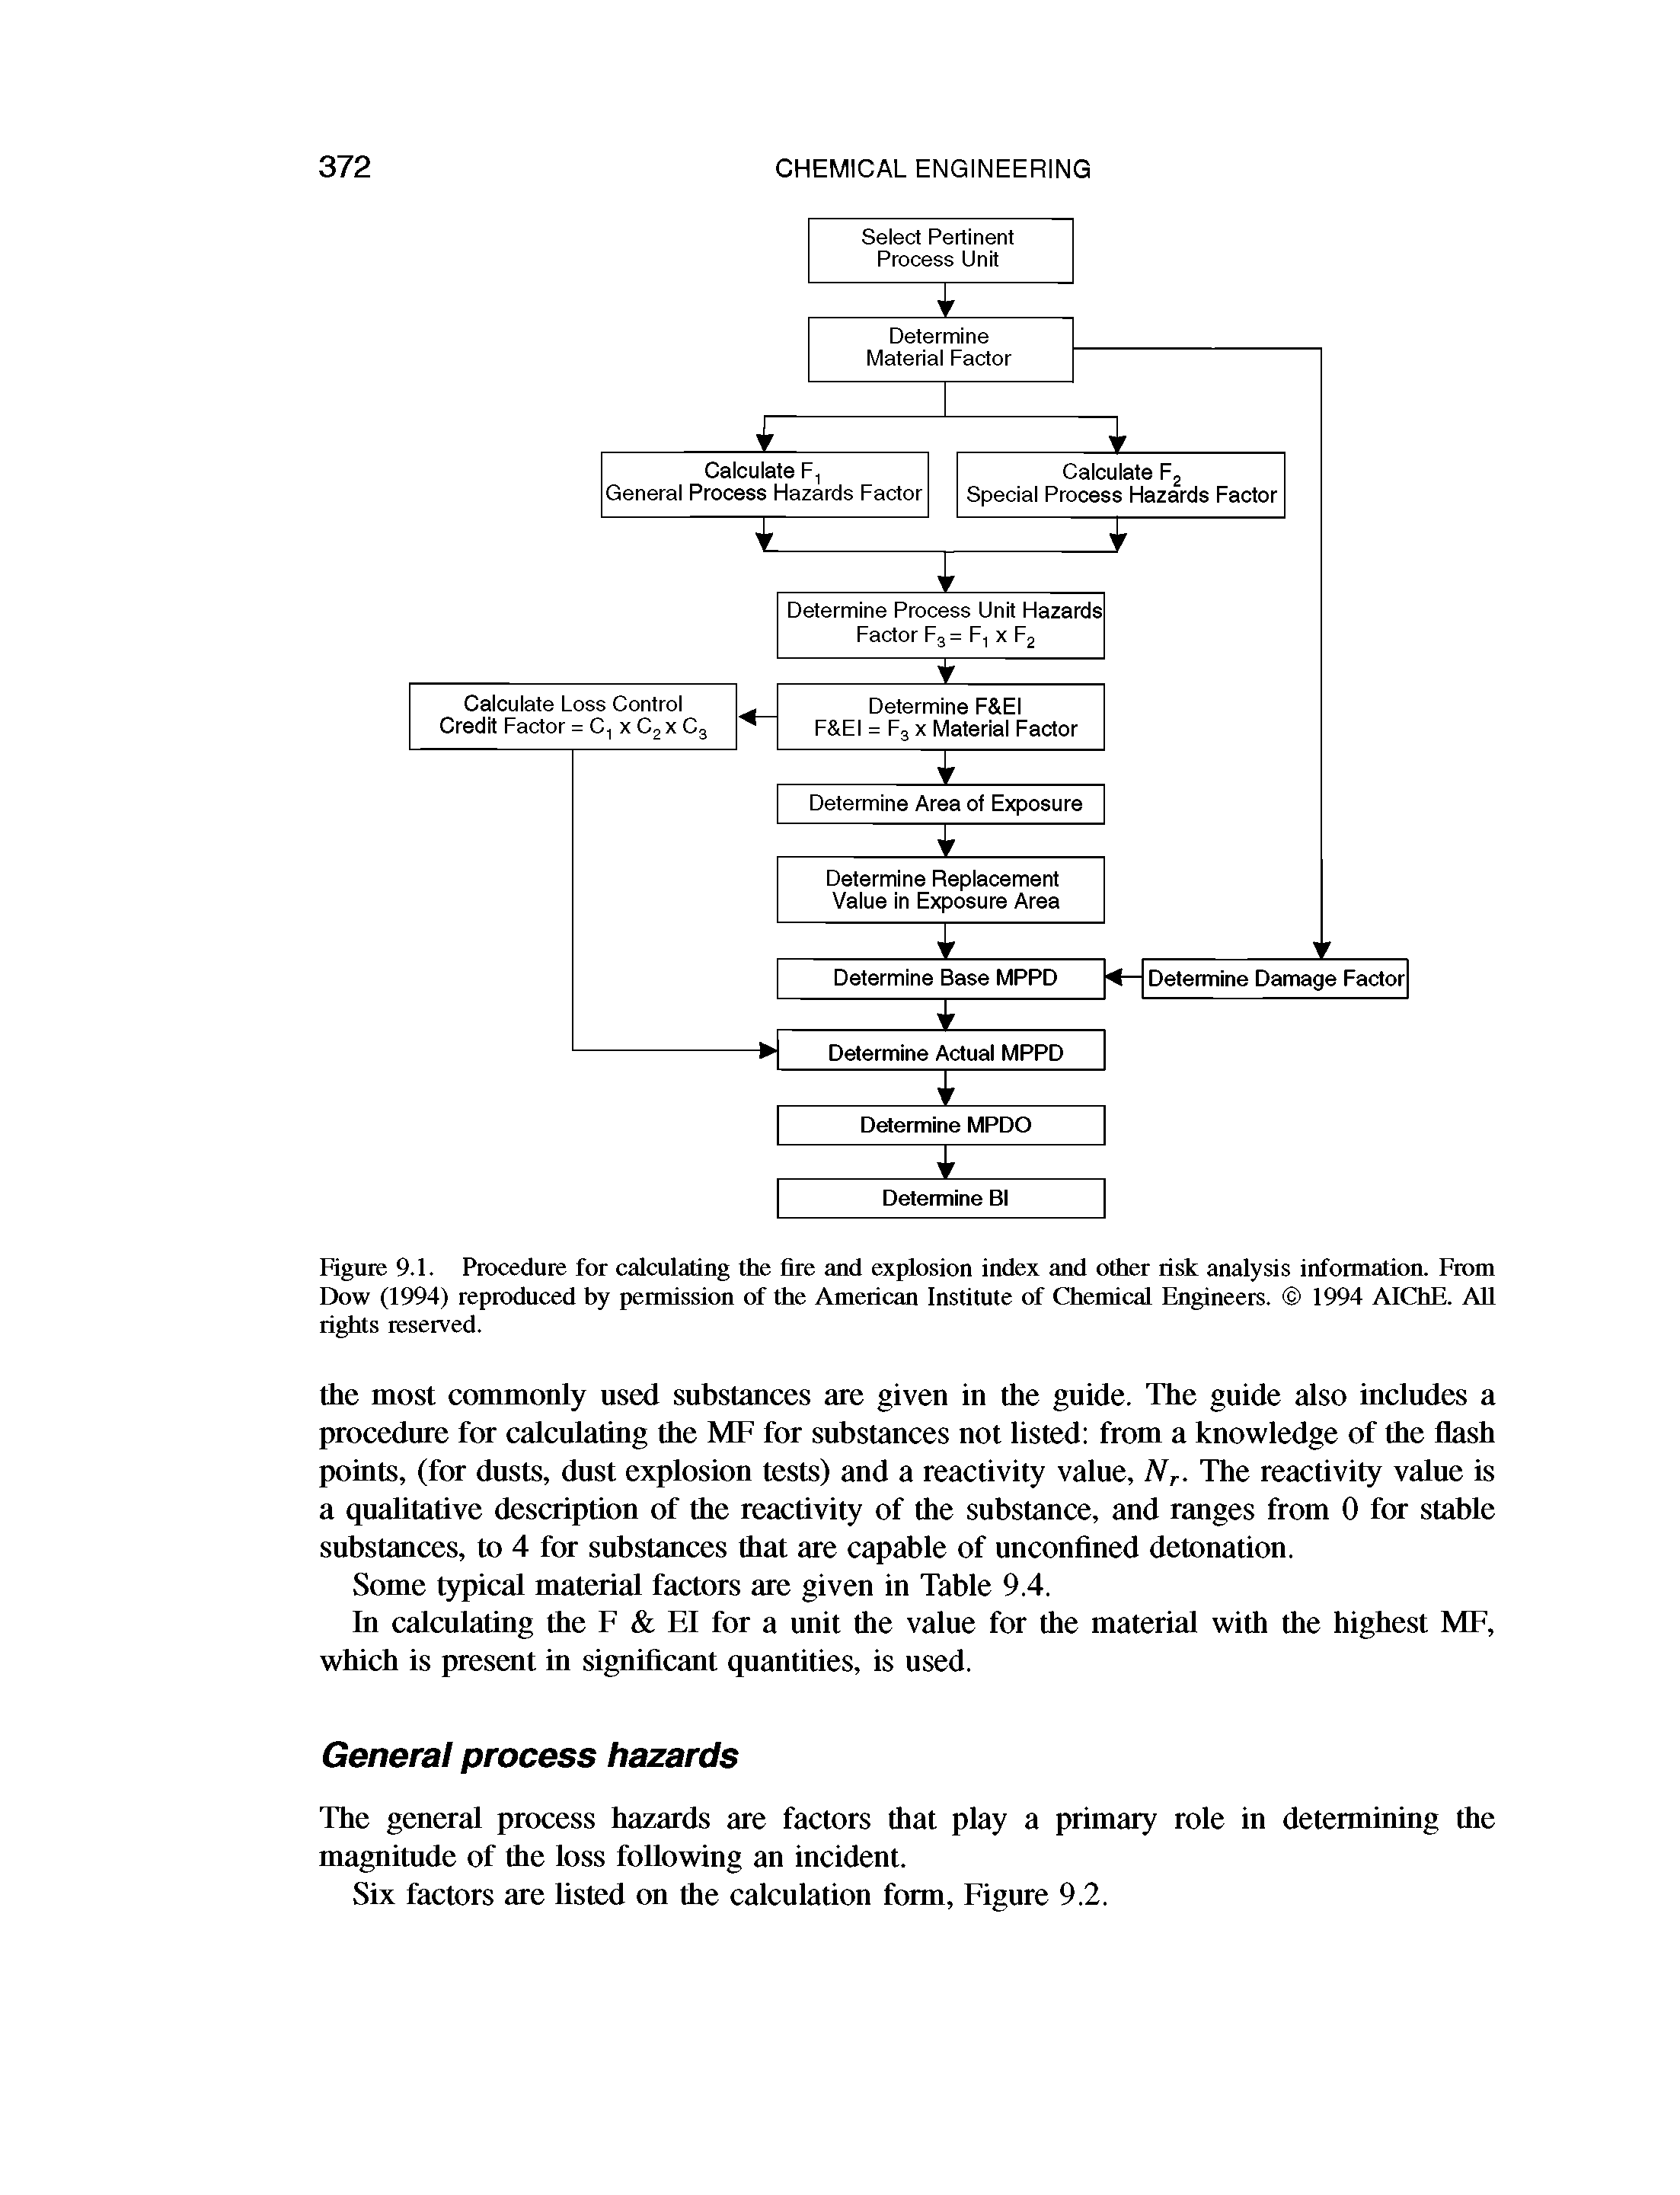 Figure 9.1. Procedure for calculating the fire and explosion index and other risk analysis information. From Dow (1994) reproduced by permission of the American Institute of Chemical Engineers. 1994 AIChE. All rights reserved.